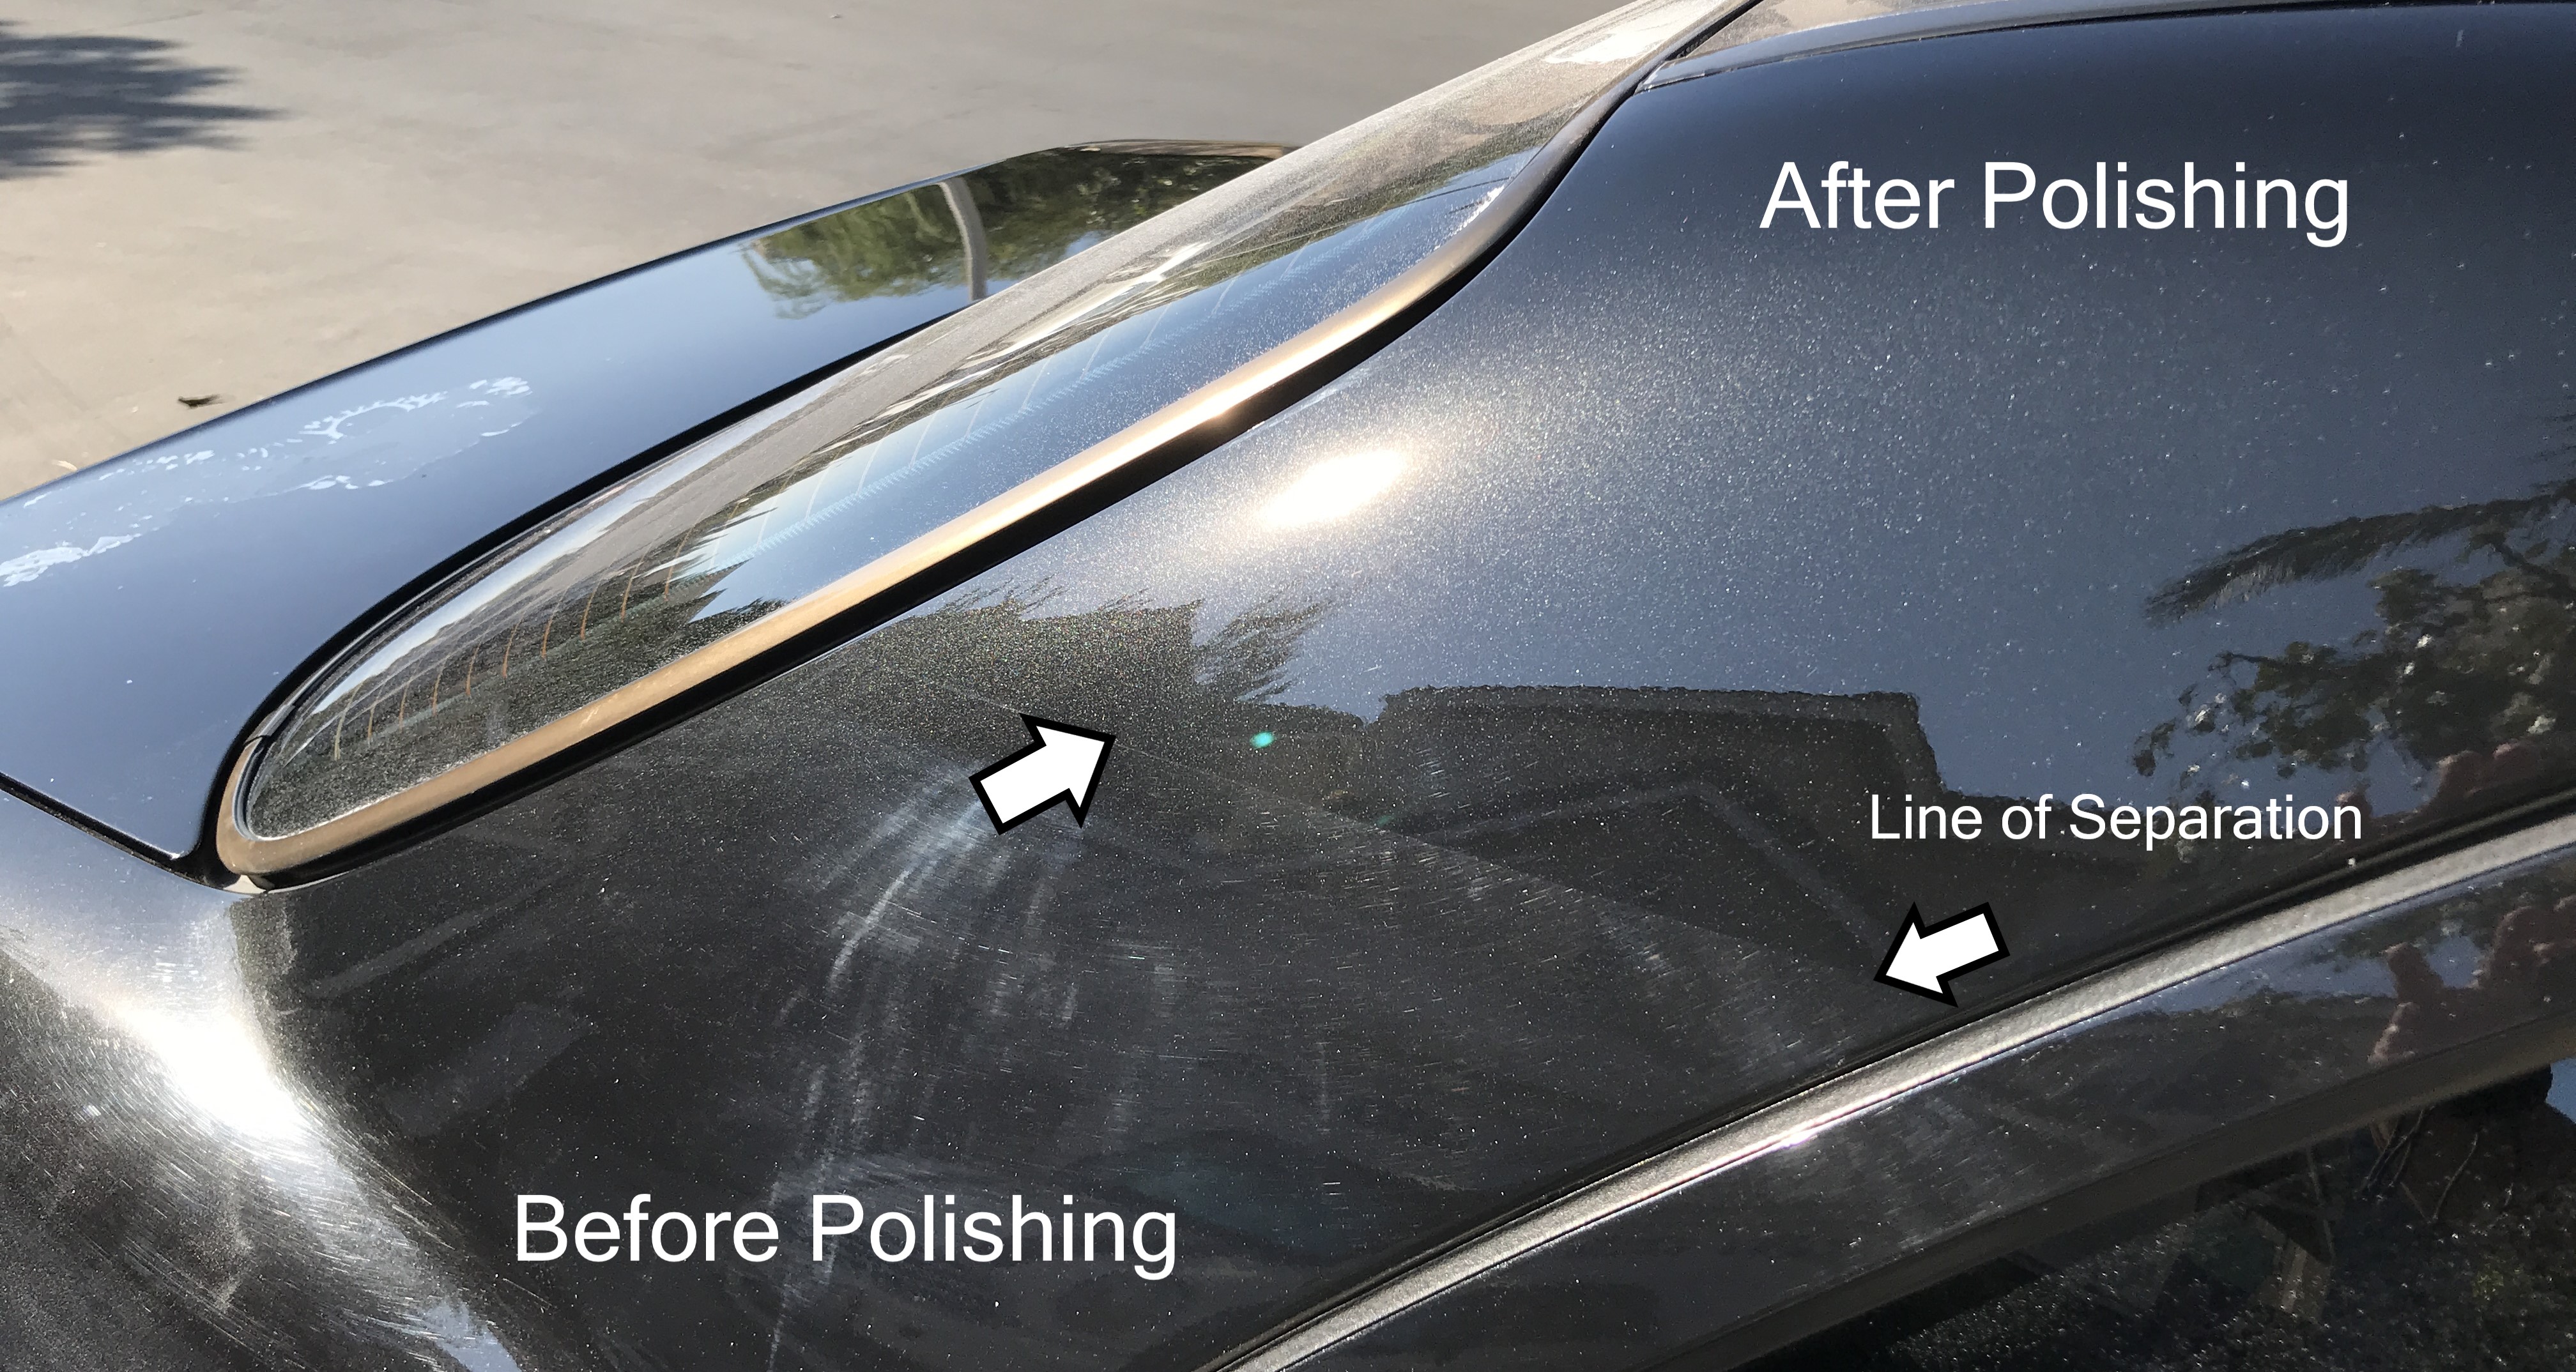 How To Remove Swirls From Car Paint - Big's Mobile Detailing